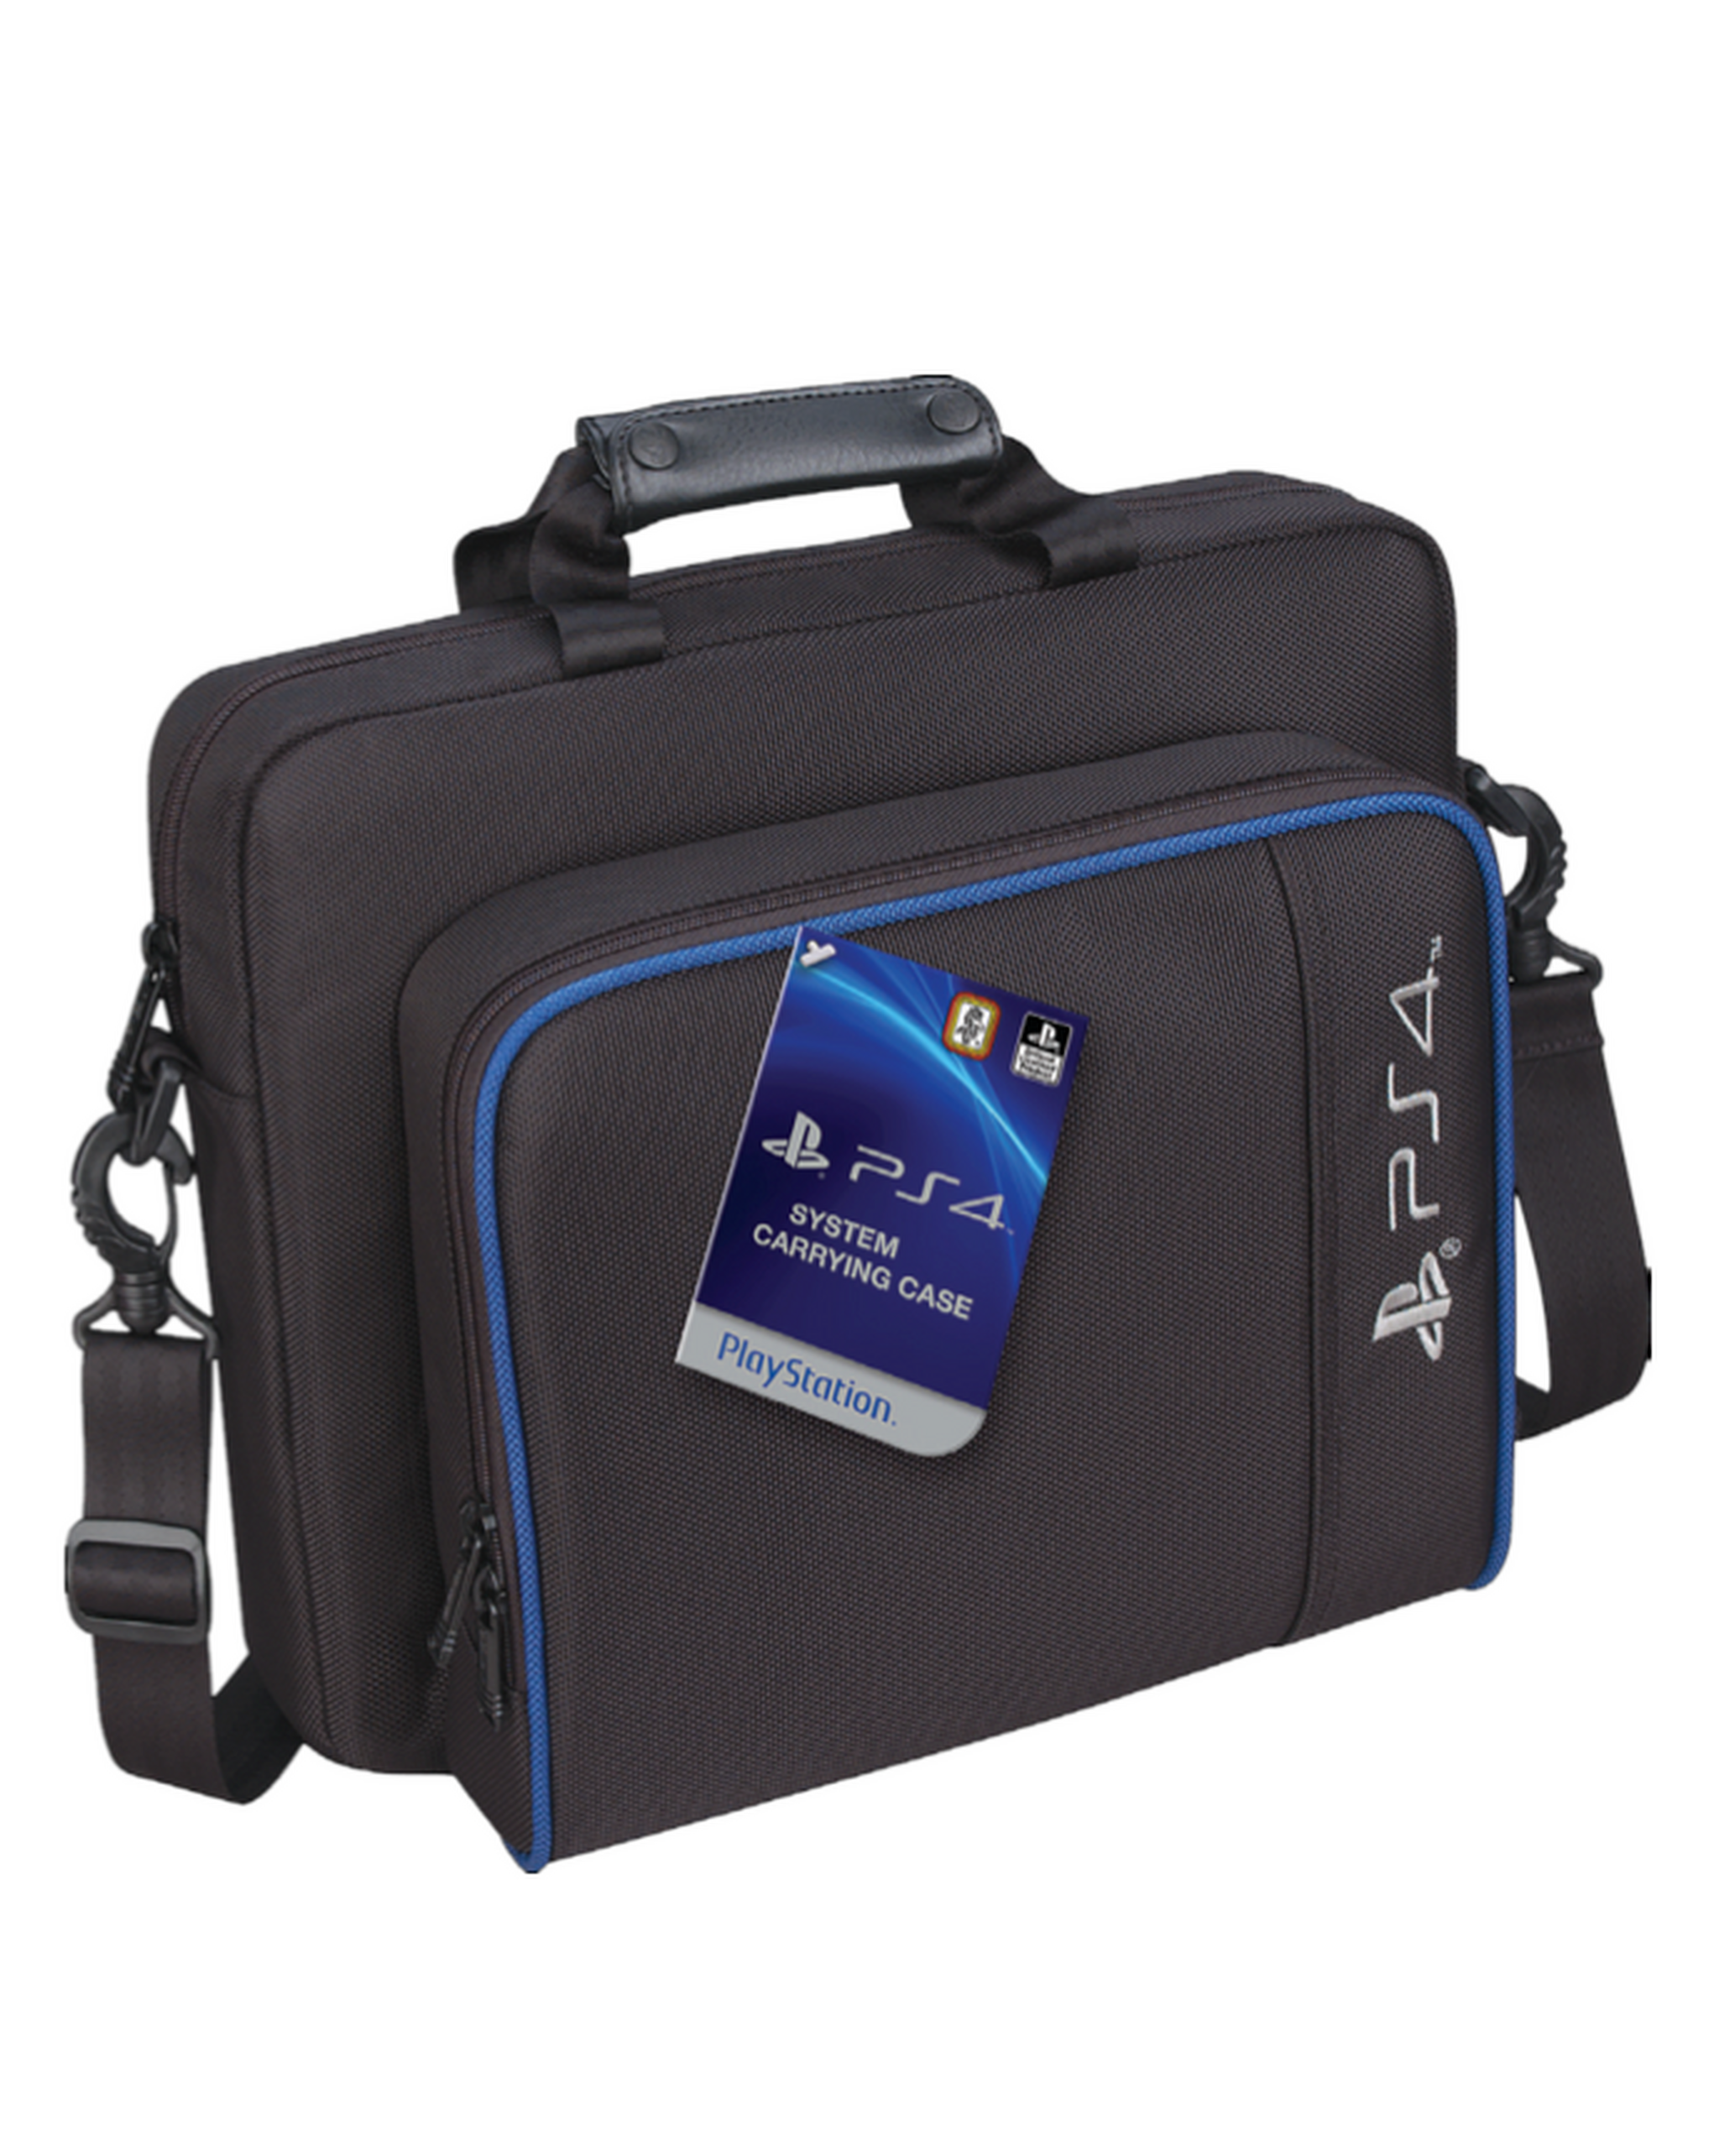 PlayStation 4 System Carrying Case